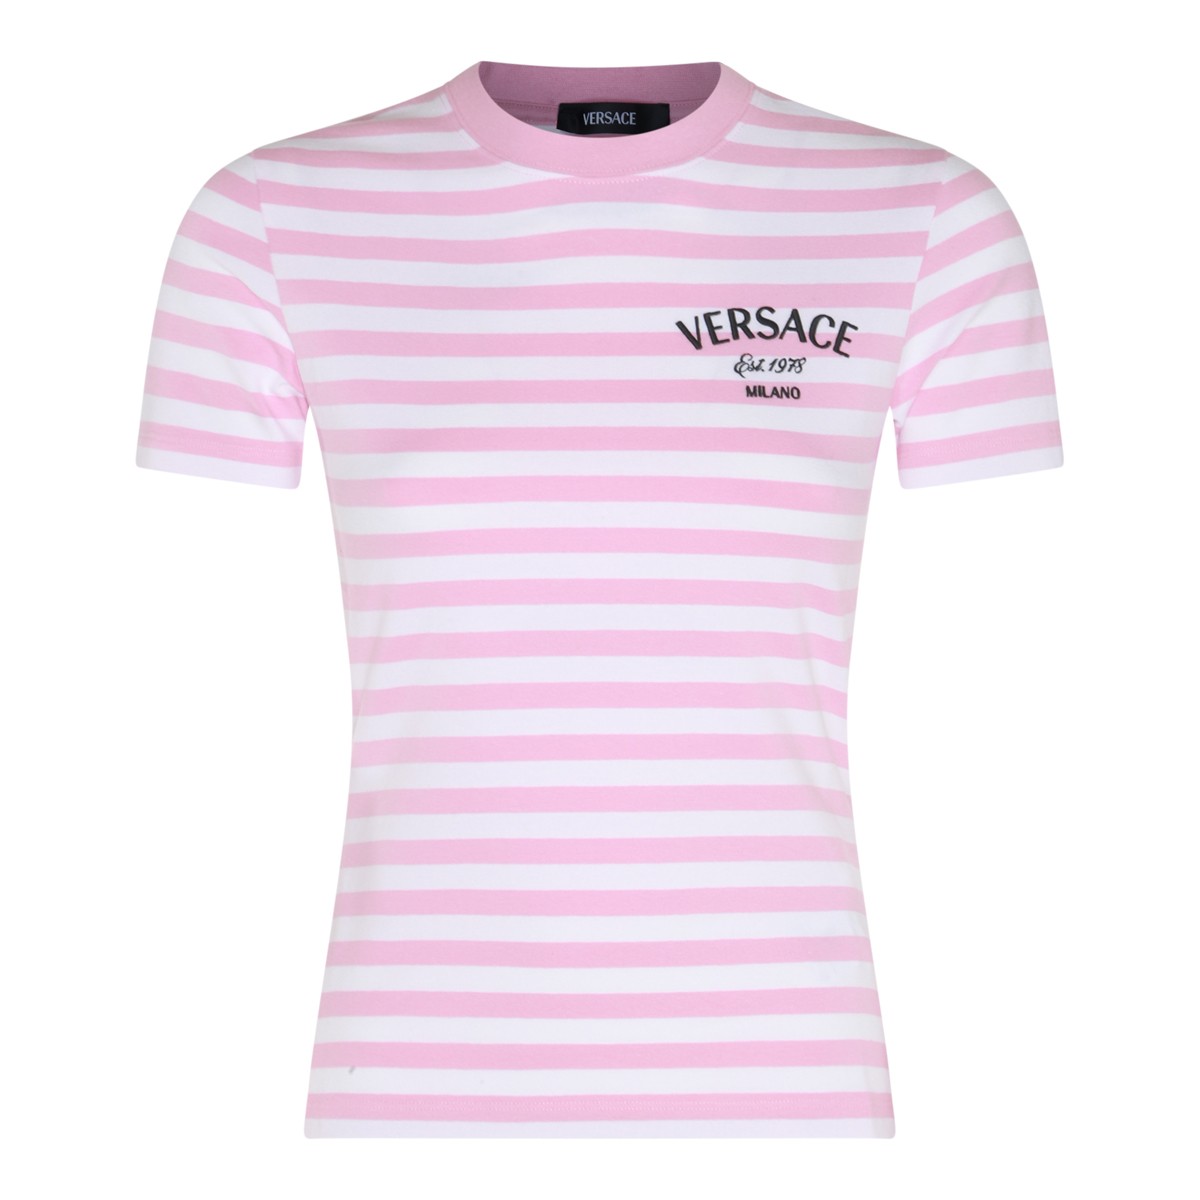 PINK AND WHITE COTTON BLEND T-SHIRT